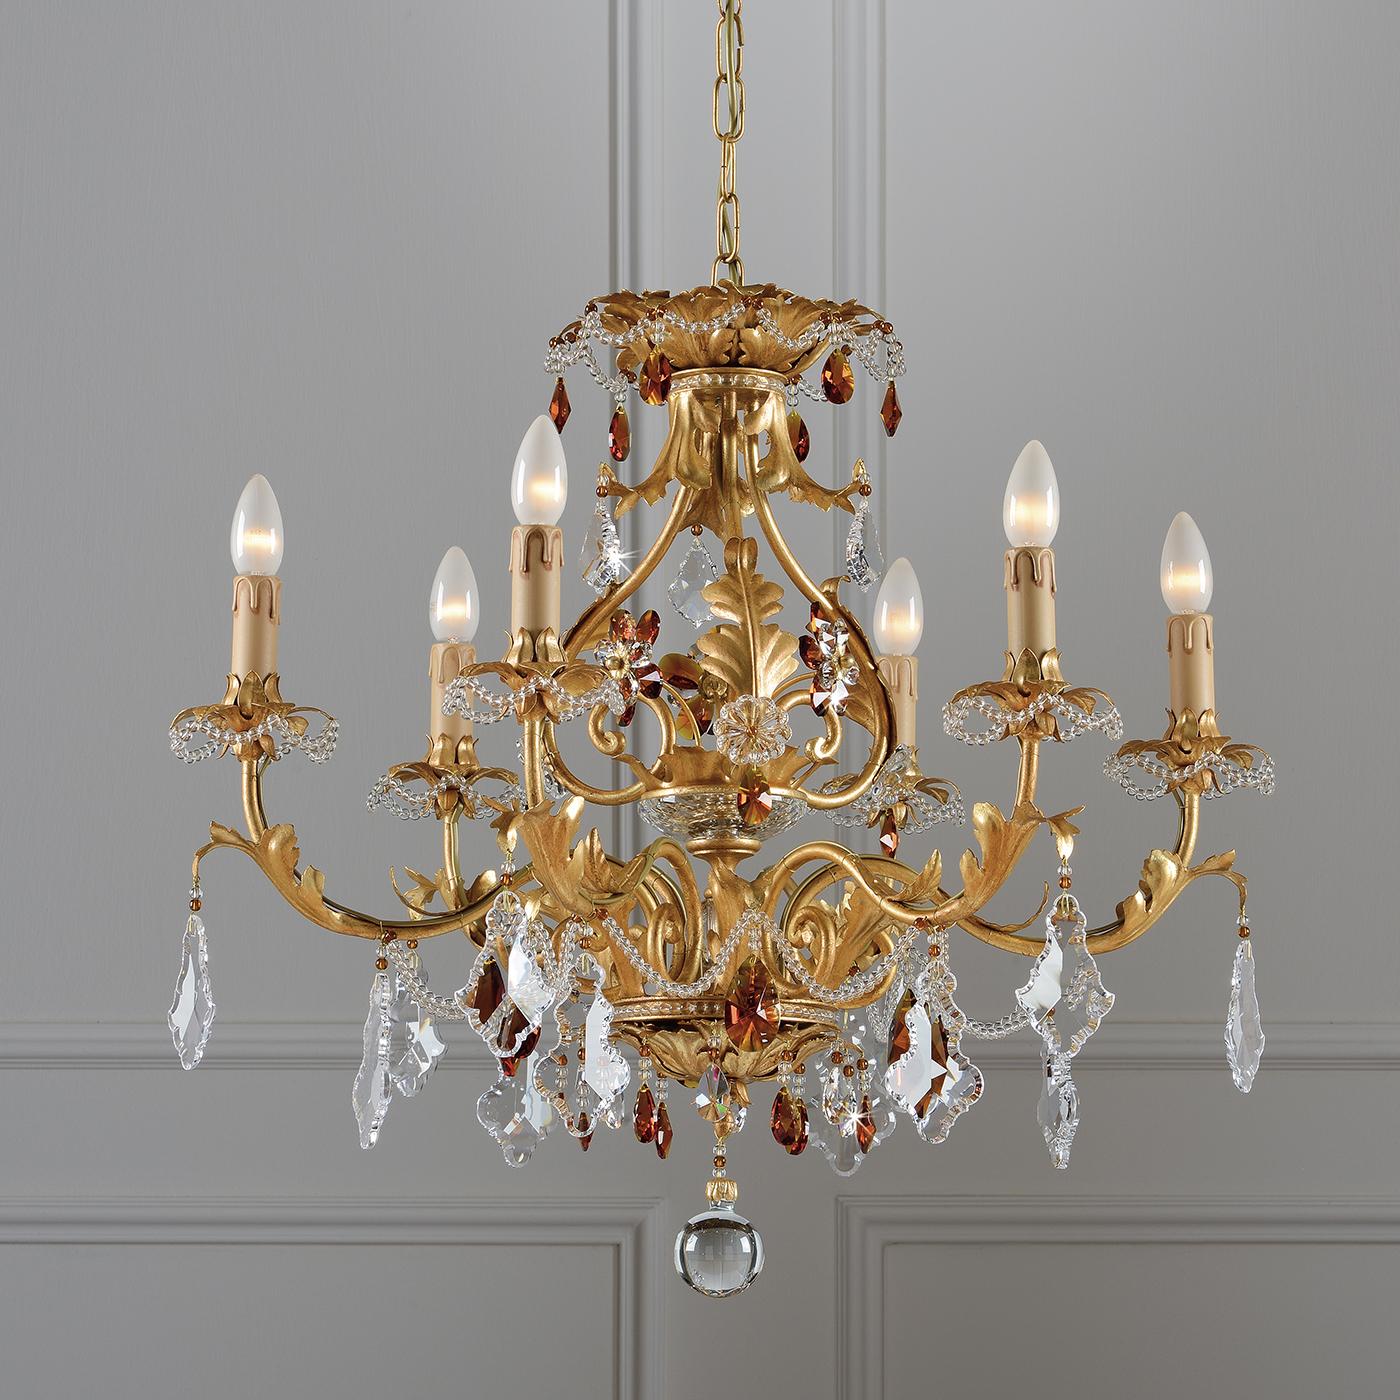 Pared down extravagance awaits in this charming six-arm chandelier. Inspired by traditional styles, the chandelier features an aged gold leaf coating, lending it antique charm. The chandelier is completed by transparent and amber crystals to reflect